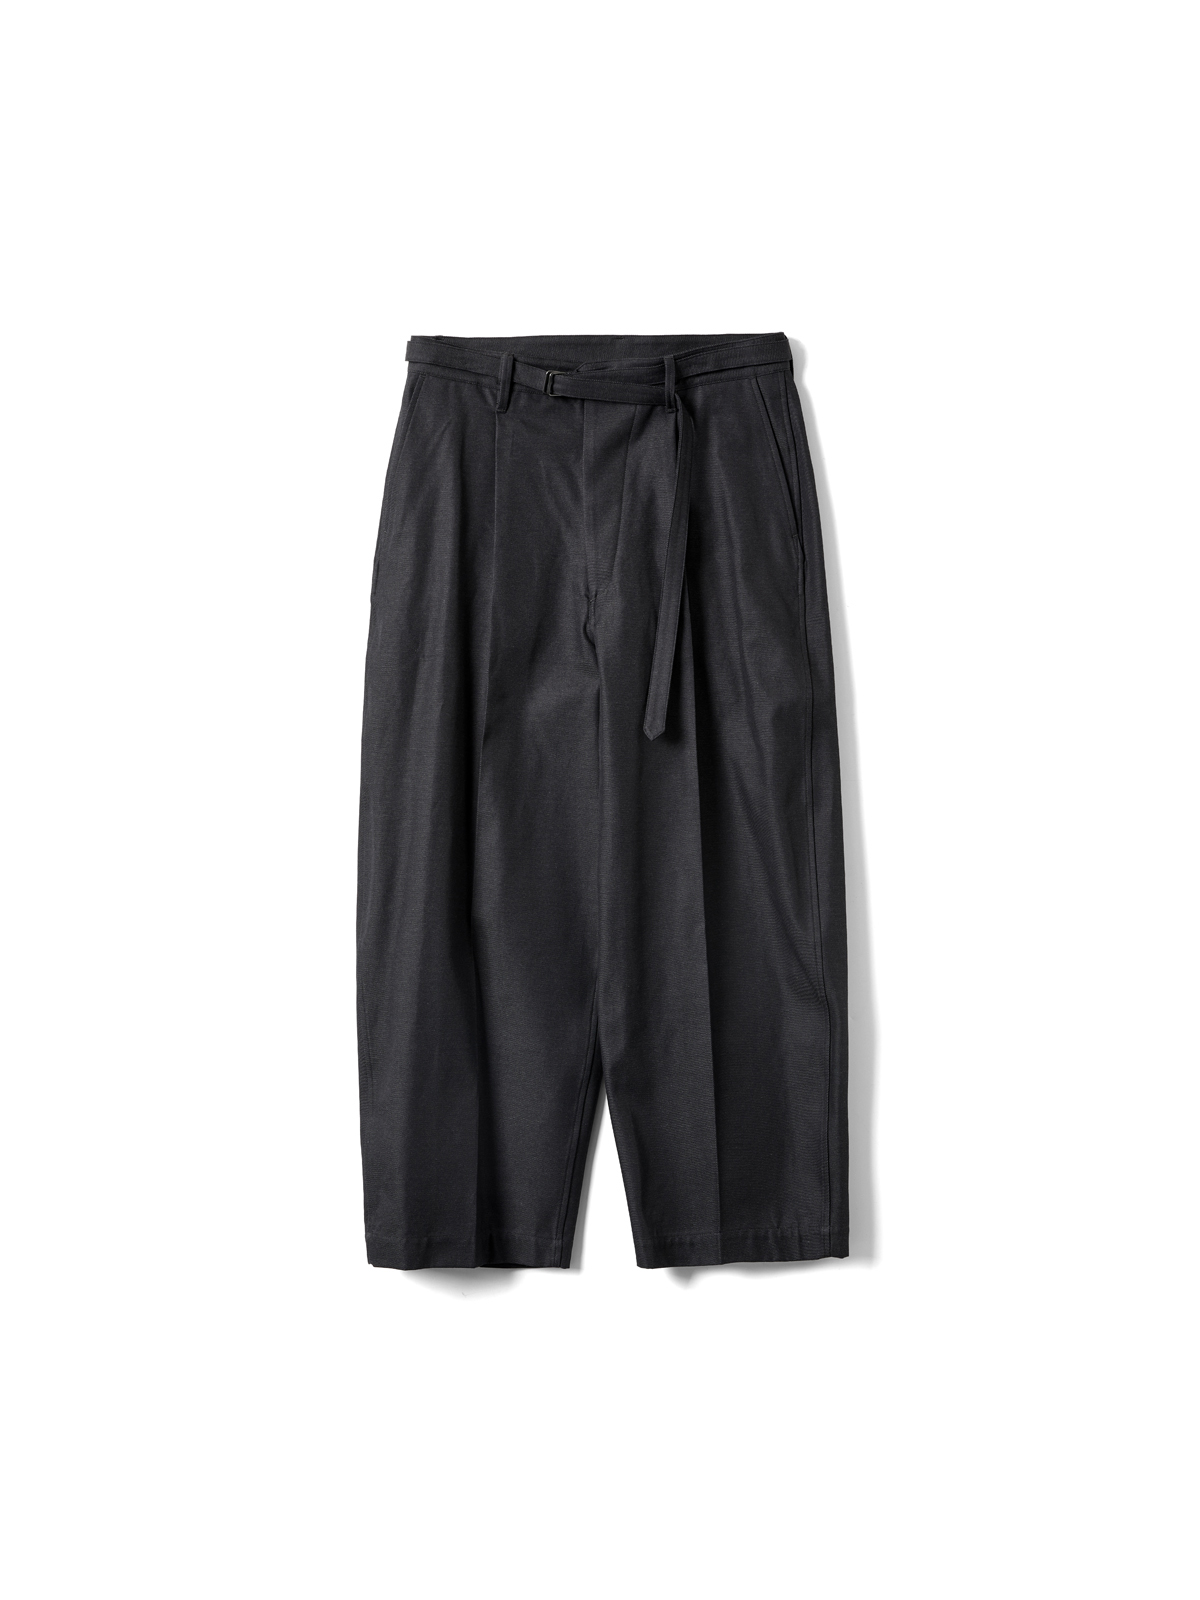 DRILL CHAMBRAY BELTED TROUSERS (HEATHERCHARCOAL)